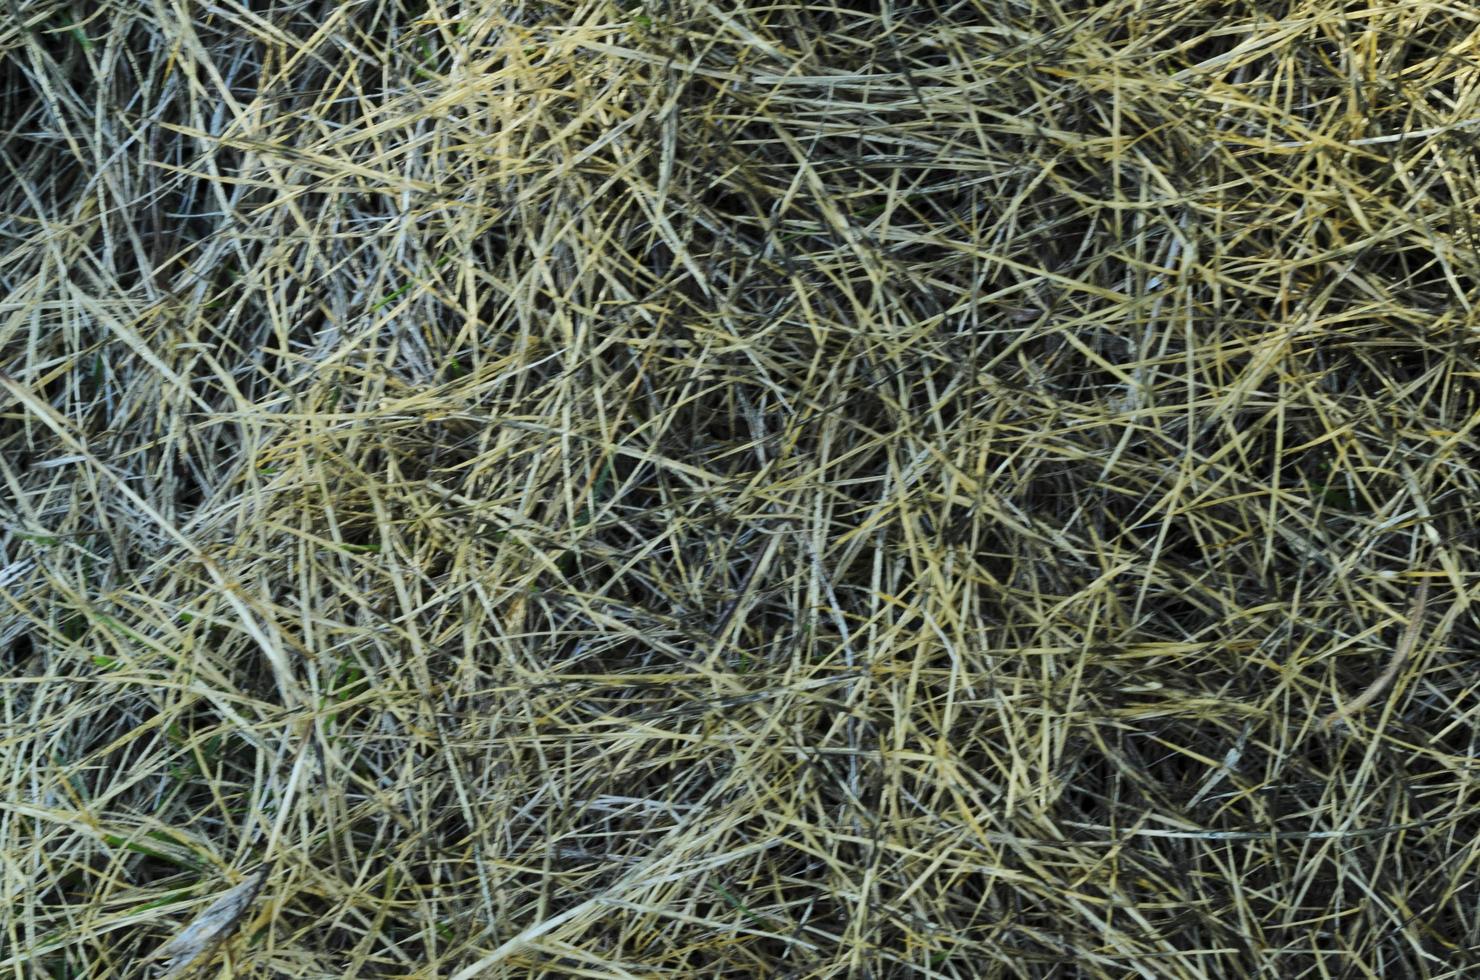 Blurry dry grass abstract backgrounds photo